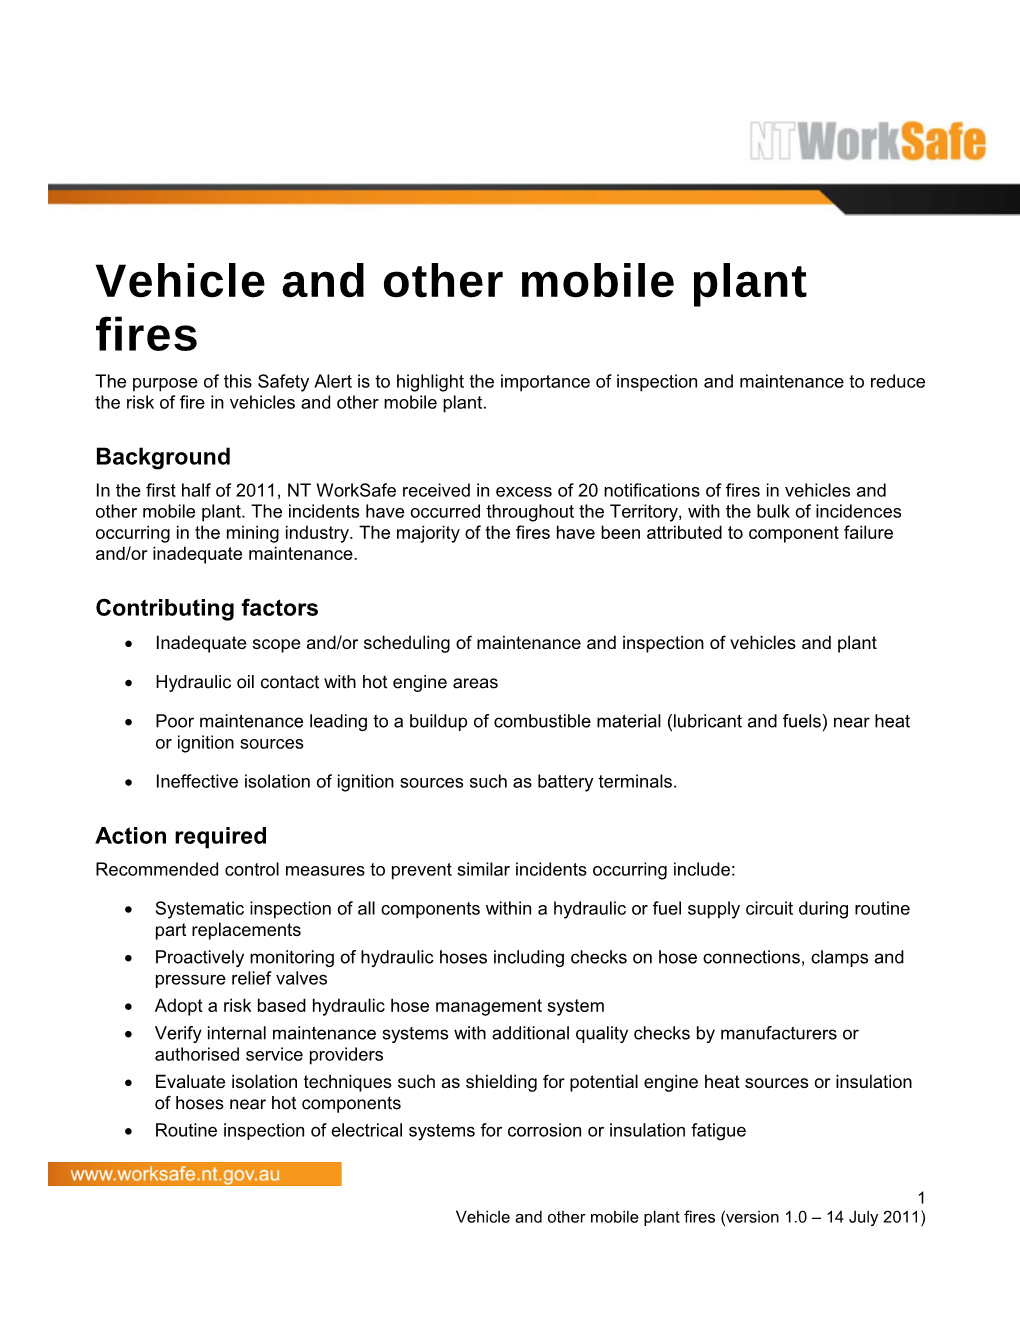 Safety Alert - Vehicle and Other Mobile Plant Fires